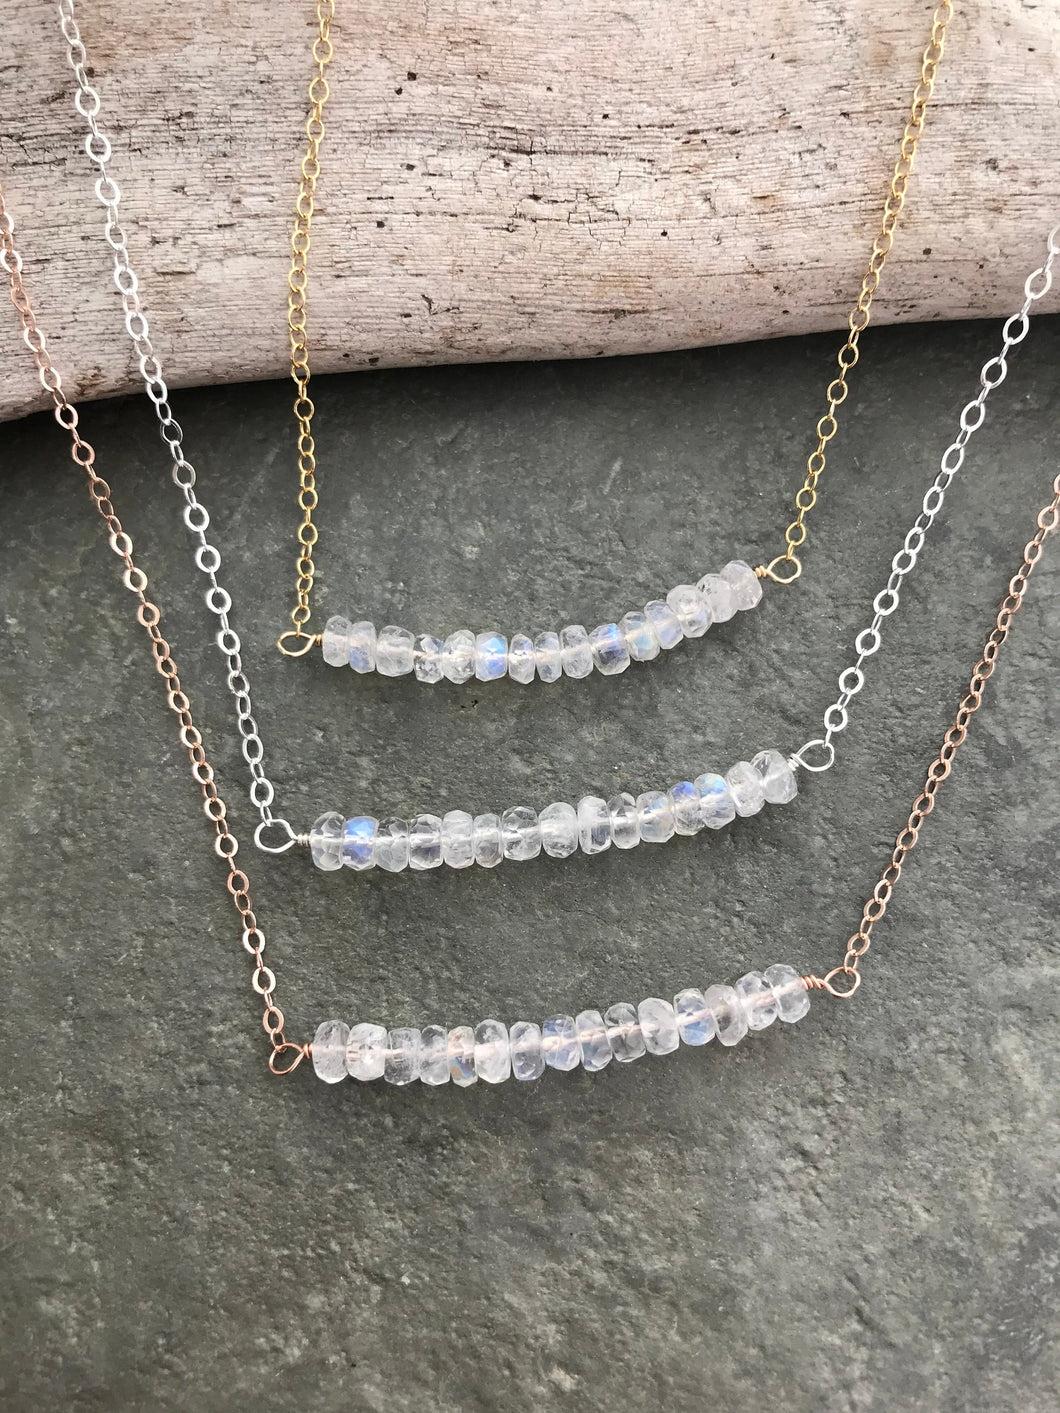 Glowing Rainbow Moonstone Layering necklace - 14k rose gold filled, sterling silver or 14k gold fill necklace -  gemstone bar necklace